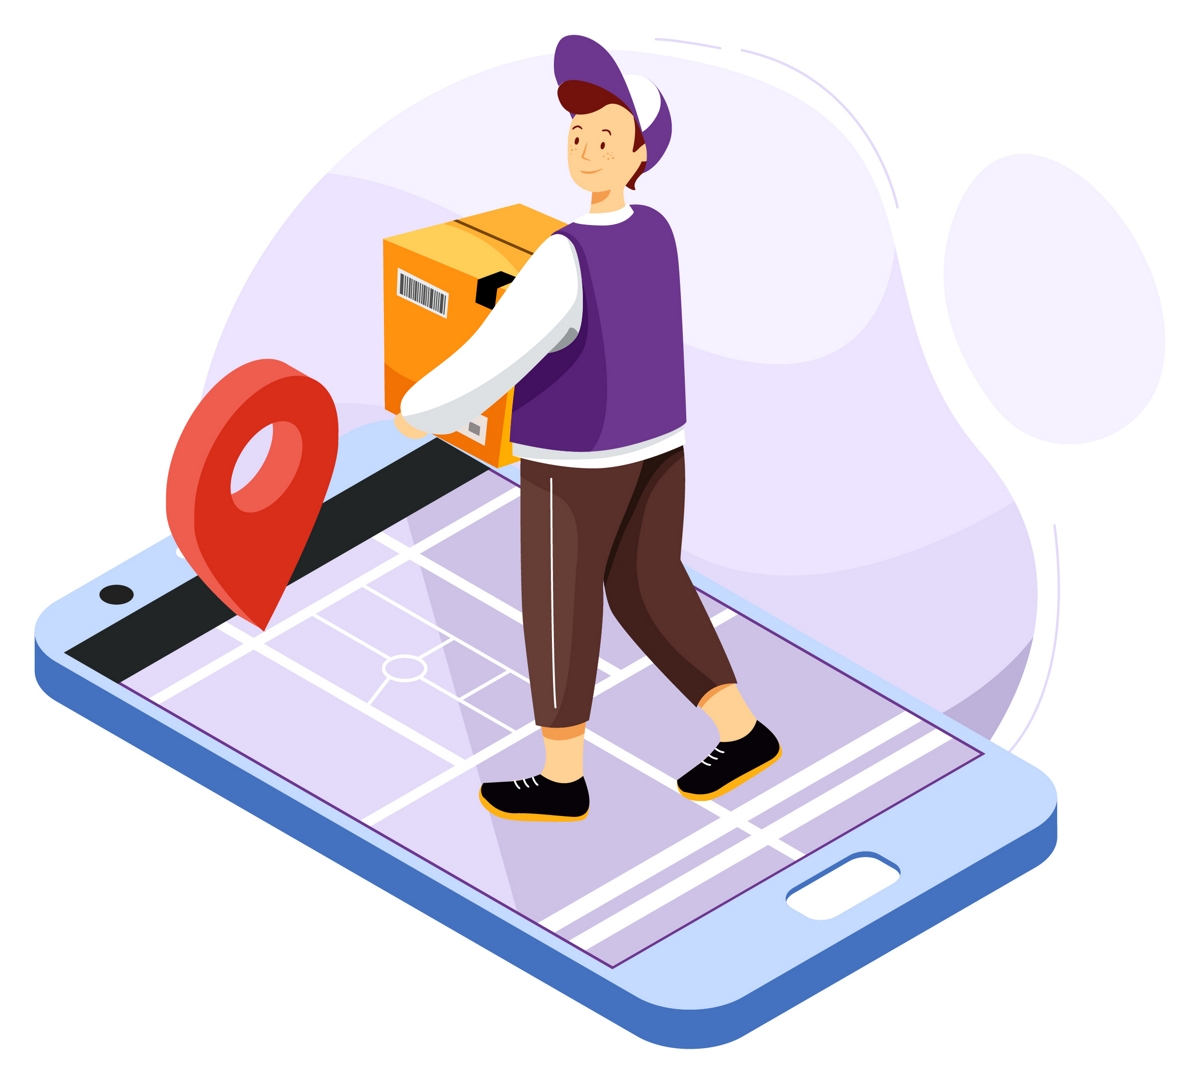 Illustration of a person carrying a box walking on large phone displaying a map and map marker